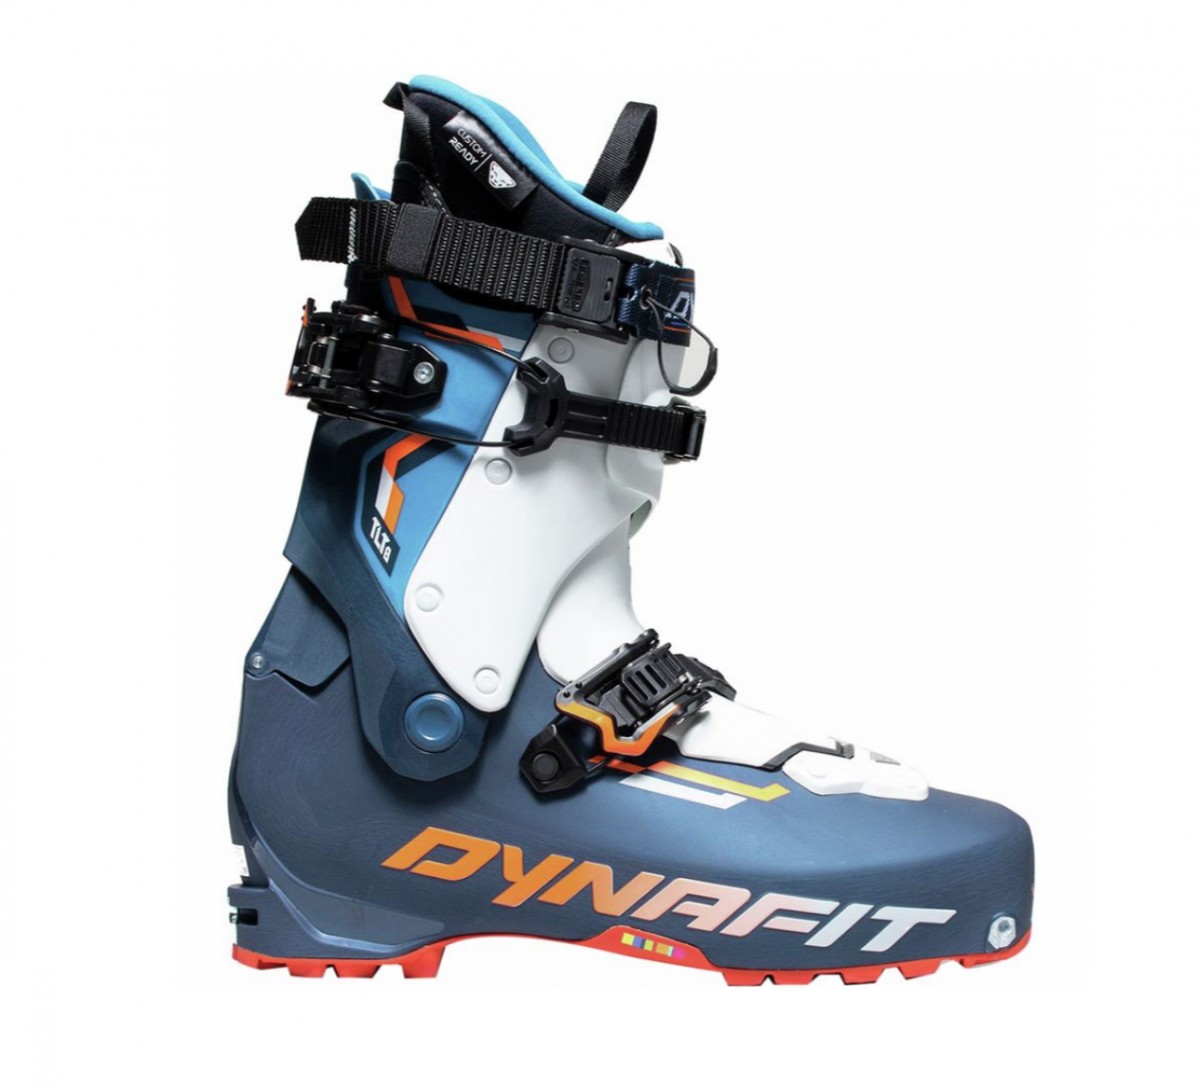 dynafit tlt 8 expedition backcountry ski boots review